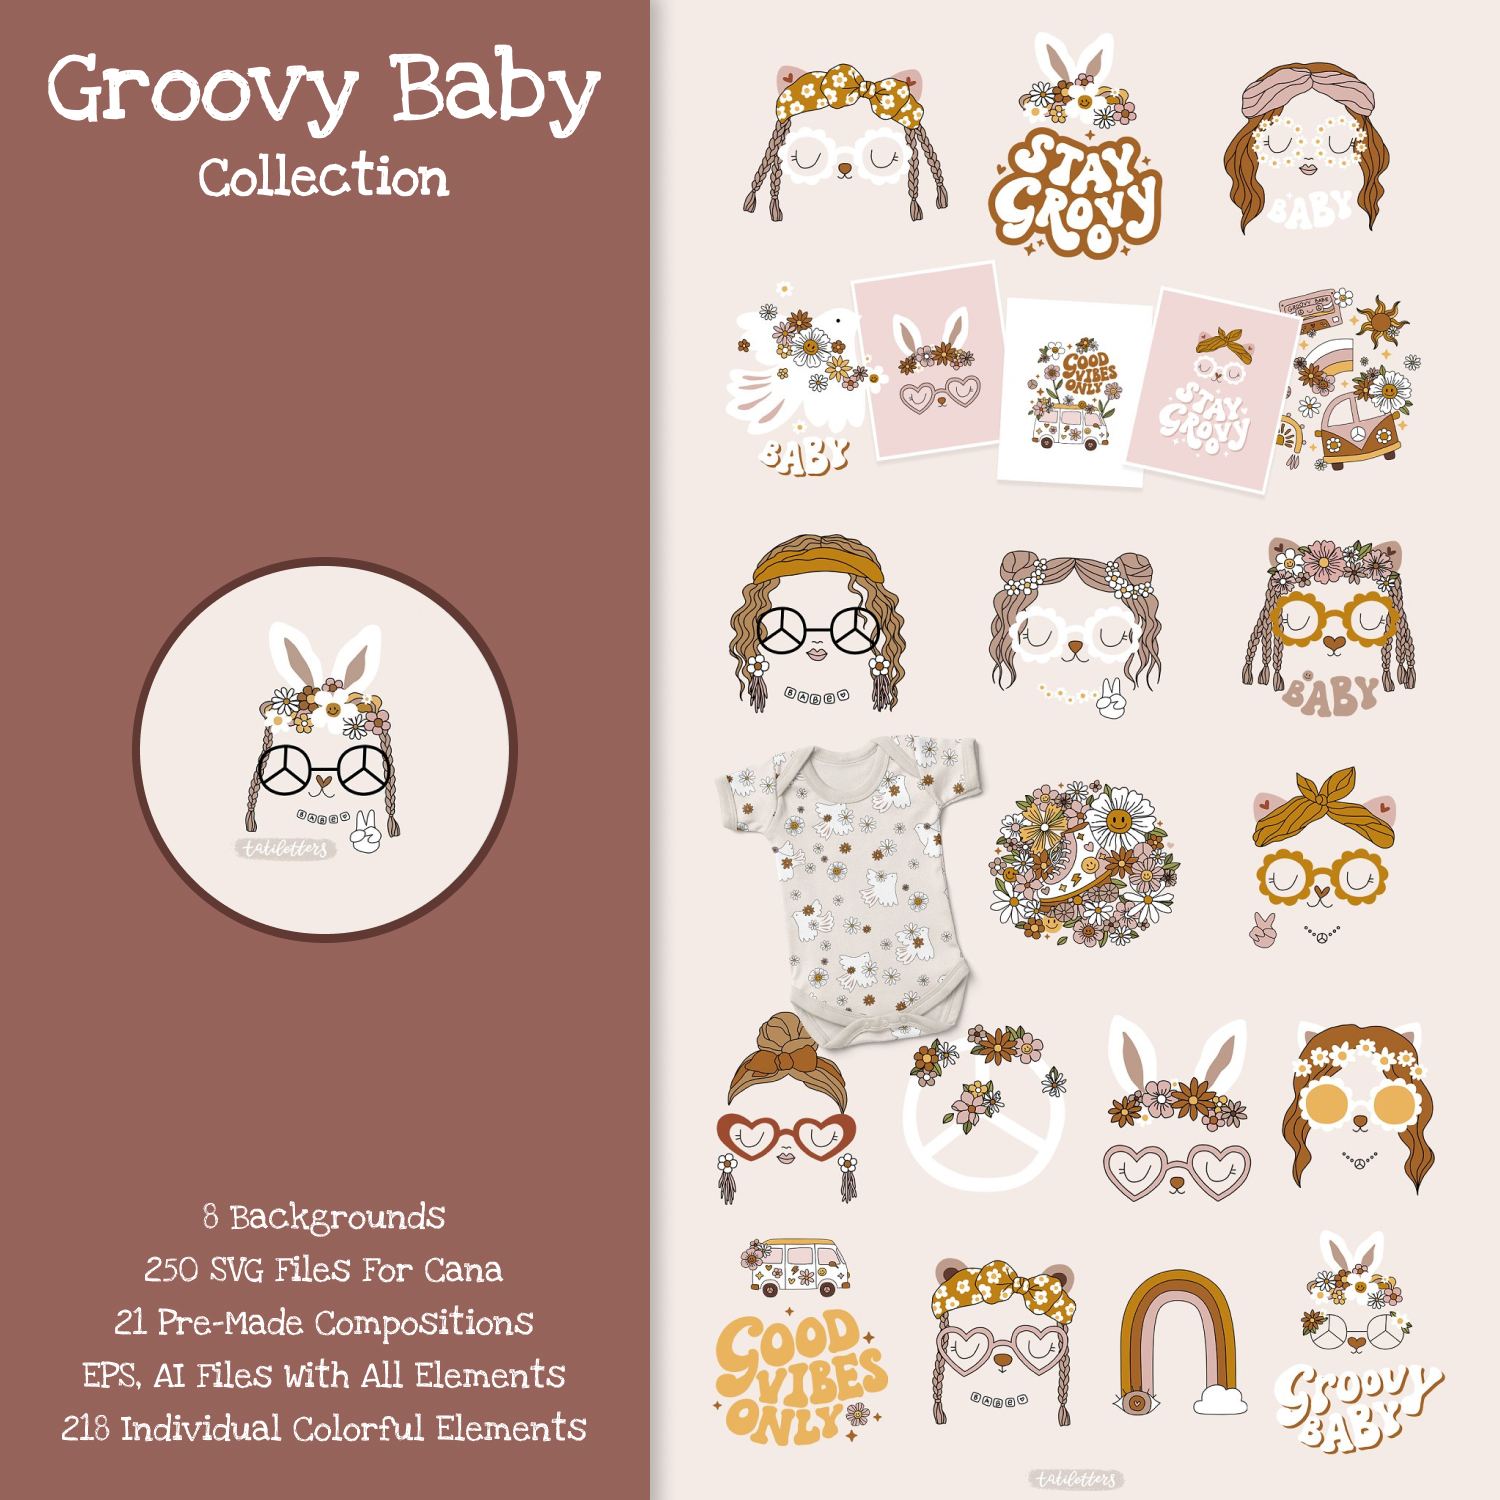 Prints of groovy baby collection.